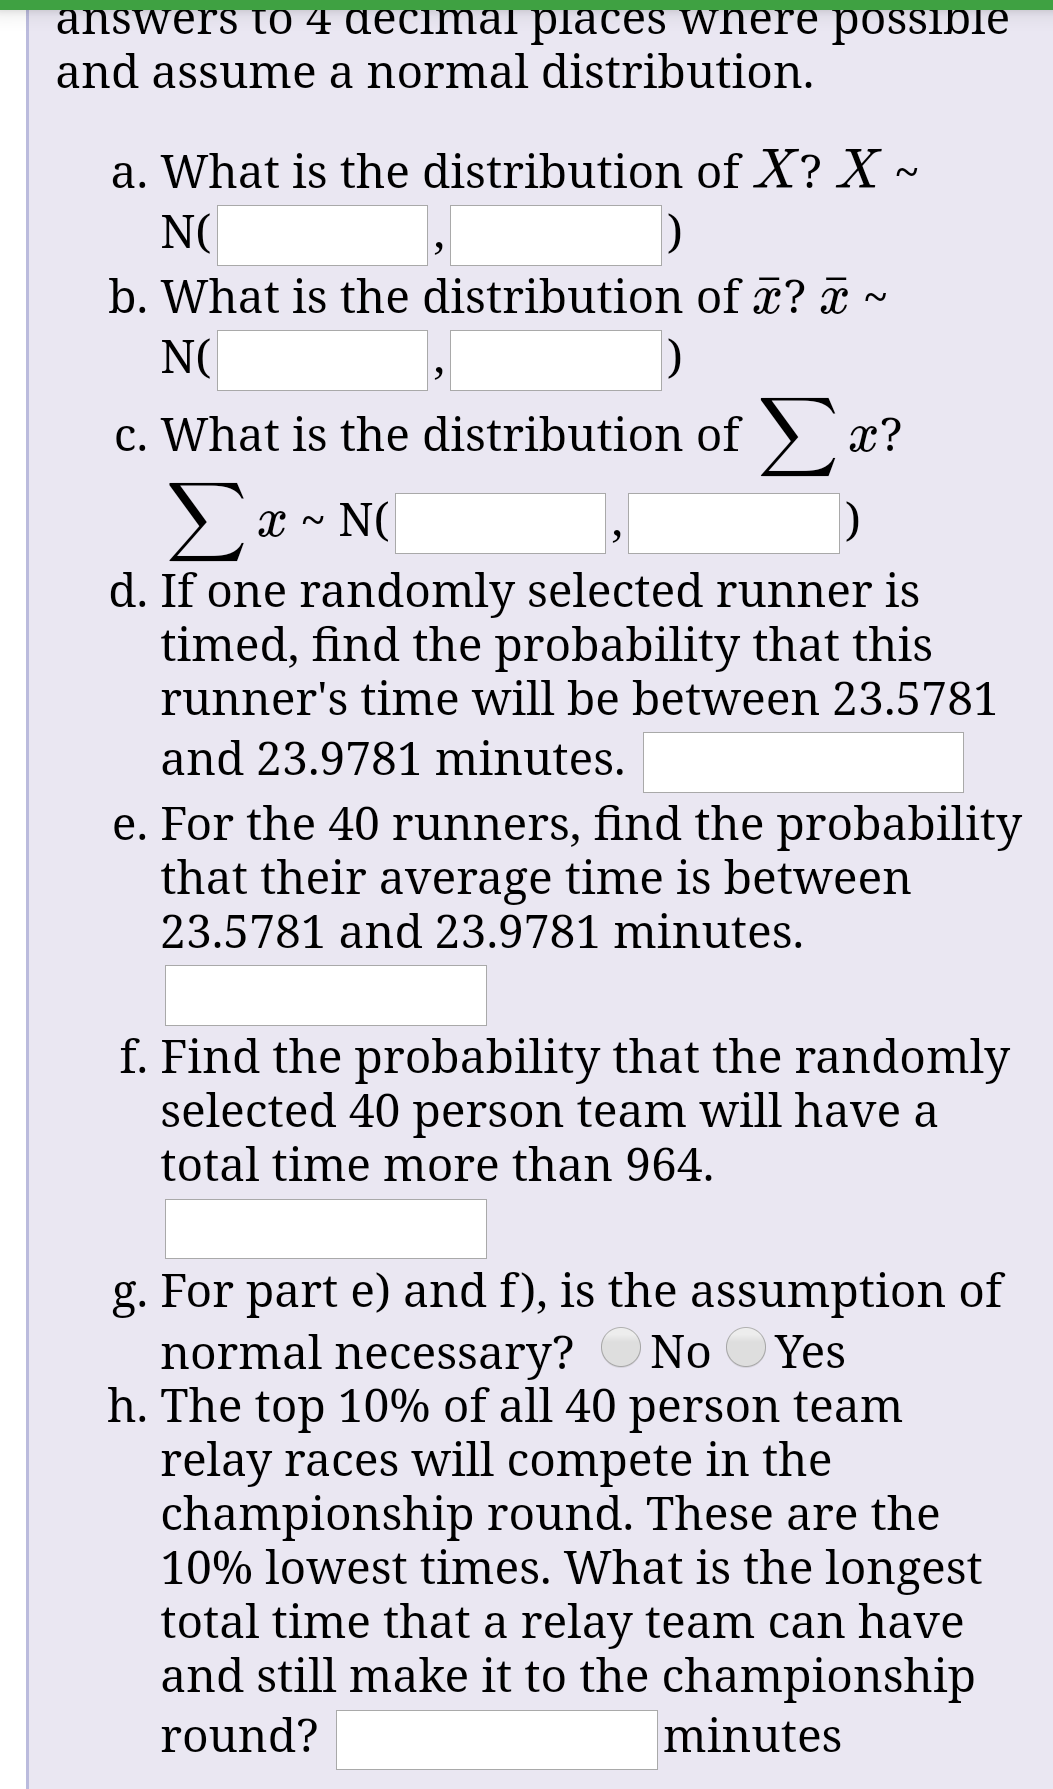 answers to 4 decimal places where possible
and assume a normal distribution.
a. What is the distribution of X? X ~
N(
b. What is the distribution of ¤? ¤ ~
N(
c. What is the distribution of )
x?
Σε-Ν(
d. If one randomly selected runner is
timed, find the probability that this
runner's time will be between 23.5781
and 23.9781 minutes.
e. For the 40 runners, find the probability
that their average time is between
23.5781 and 23.9781 minutes.
f. Find the probability that the randomly
selected 40 person team will have a
total time more than 964.
g. For part e) and f), is the assumption of
normal necessary?
h. The top 10% of all 40 person team
relay races will compete in the
championship round. These are the
10% lowest times. What is the longest
total time that a relay team can have
and still make it to the championship
No
Yes
round?
minutes
